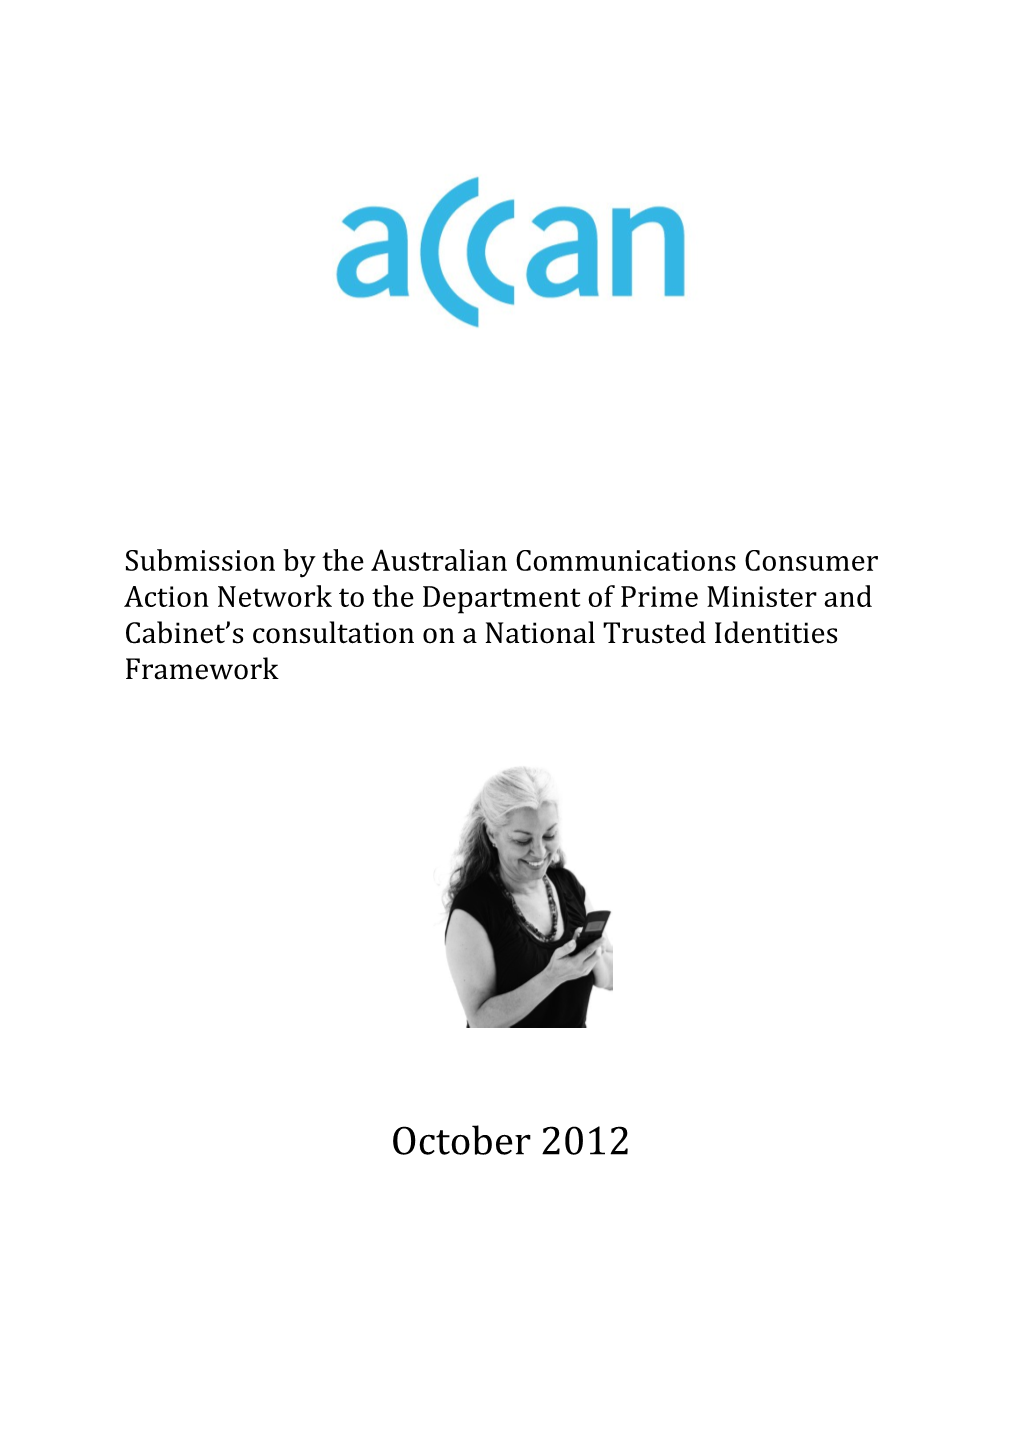 Submission by the Australian Communications Consumer Action Network to the Department Of